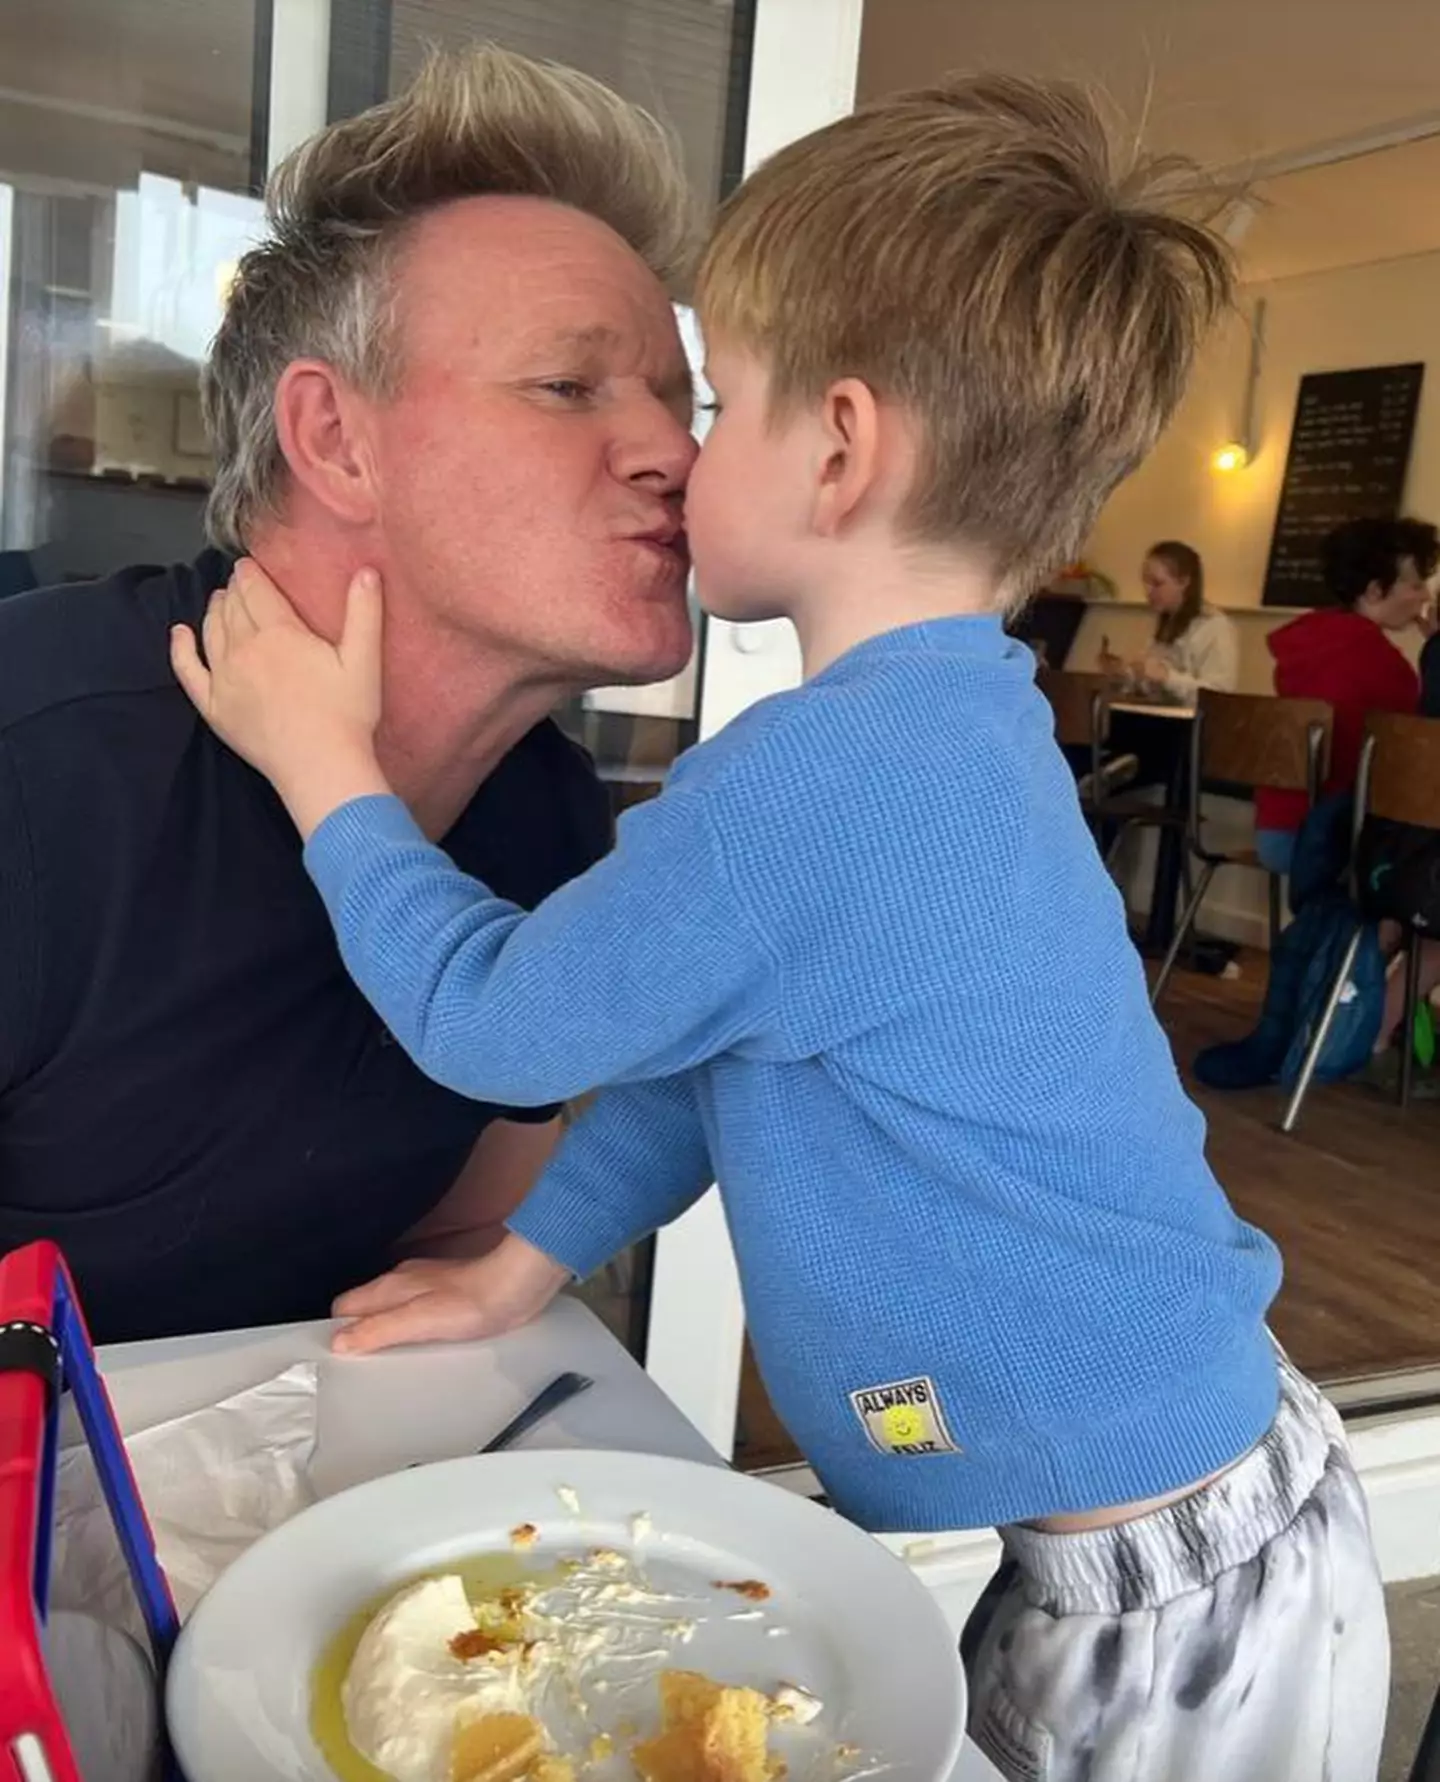 Gordon Ramsay has been praised for the cute photo.